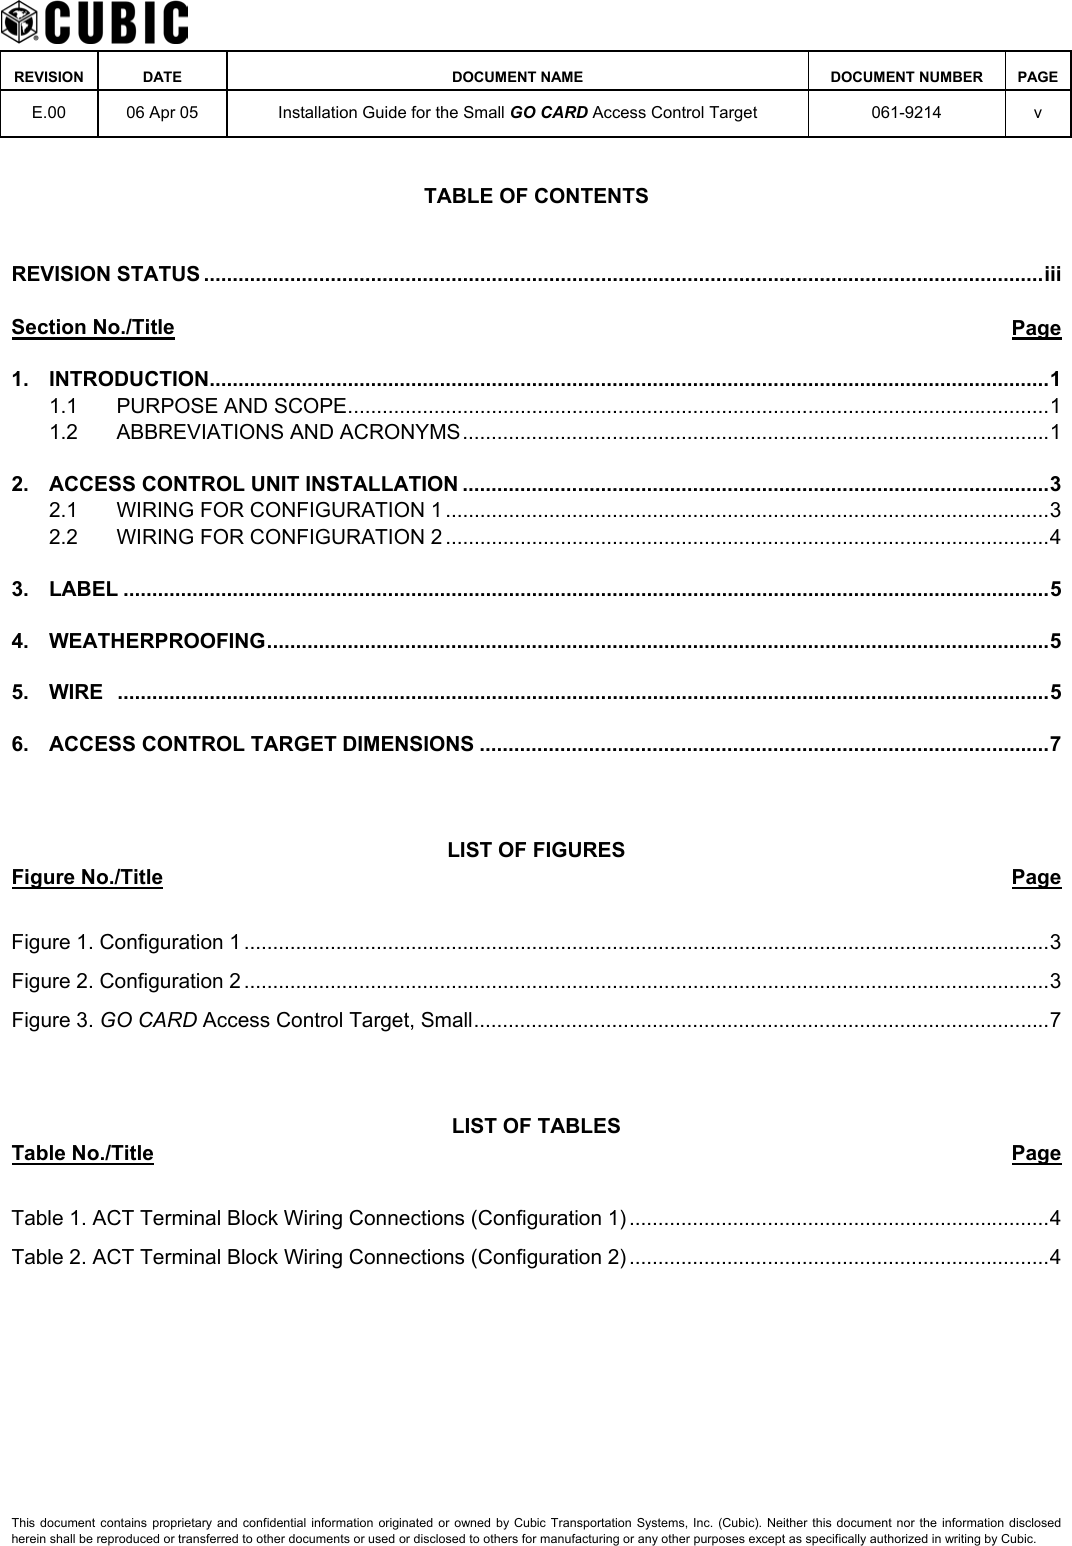    REVISION DATE  DOCUMENT NAME  DOCUMENT NUMBER  PAGE  E.00  06 Apr 05  Installation Guide for the Small GO CARD Access Control Target  061-9214 v  TABLE OF CONTENTS  REVISION STATUS ..................................................................................................................................................iii  Section No./Title Page 1. INTRODUCTION..................................................................................................................................................1 1.1 PURPOSE AND SCOPE..........................................................................................................................1 1.2 ABBREVIATIONS AND ACRONYMS......................................................................................................1 2. ACCESS CONTROL UNIT INSTALLATION ......................................................................................................3 2.1 WIRING FOR CONFIGURATION 1 .........................................................................................................3 2.2 WIRING FOR CONFIGURATION 2 .........................................................................................................4 3. LABEL .................................................................................................................................................................5 4. WEATHERPROOFING........................................................................................................................................5 5. WIRE ..................................................................................................................................................................5 6. ACCESS CONTROL TARGET DIMENSIONS ...................................................................................................7    LIST OF FIGURES Figure No./Title Page  Figure 1. Configuration 1 ............................................................................................................................................3 Figure 2. Configuration 2 ............................................................................................................................................3 Figure 3. GO CARD Access Control Target, Small....................................................................................................7    LIST OF TABLES Table No./Title Page  Table 1. ACT Terminal Block Wiring Connections (Configuration 1) .........................................................................4 Table 2. ACT Terminal Block Wiring Connections (Configuration 2) .........................................................................4  This document contains proprietary and confidential information originated or owned by Cubic Transportation Systems, Inc. (Cubic). Neither this document nor the information disclosed herein shall be reproduced or transferred to other documents or used or disclosed to others for manufacturing or any other purposes except as specifically authorized in writing by Cubic. 